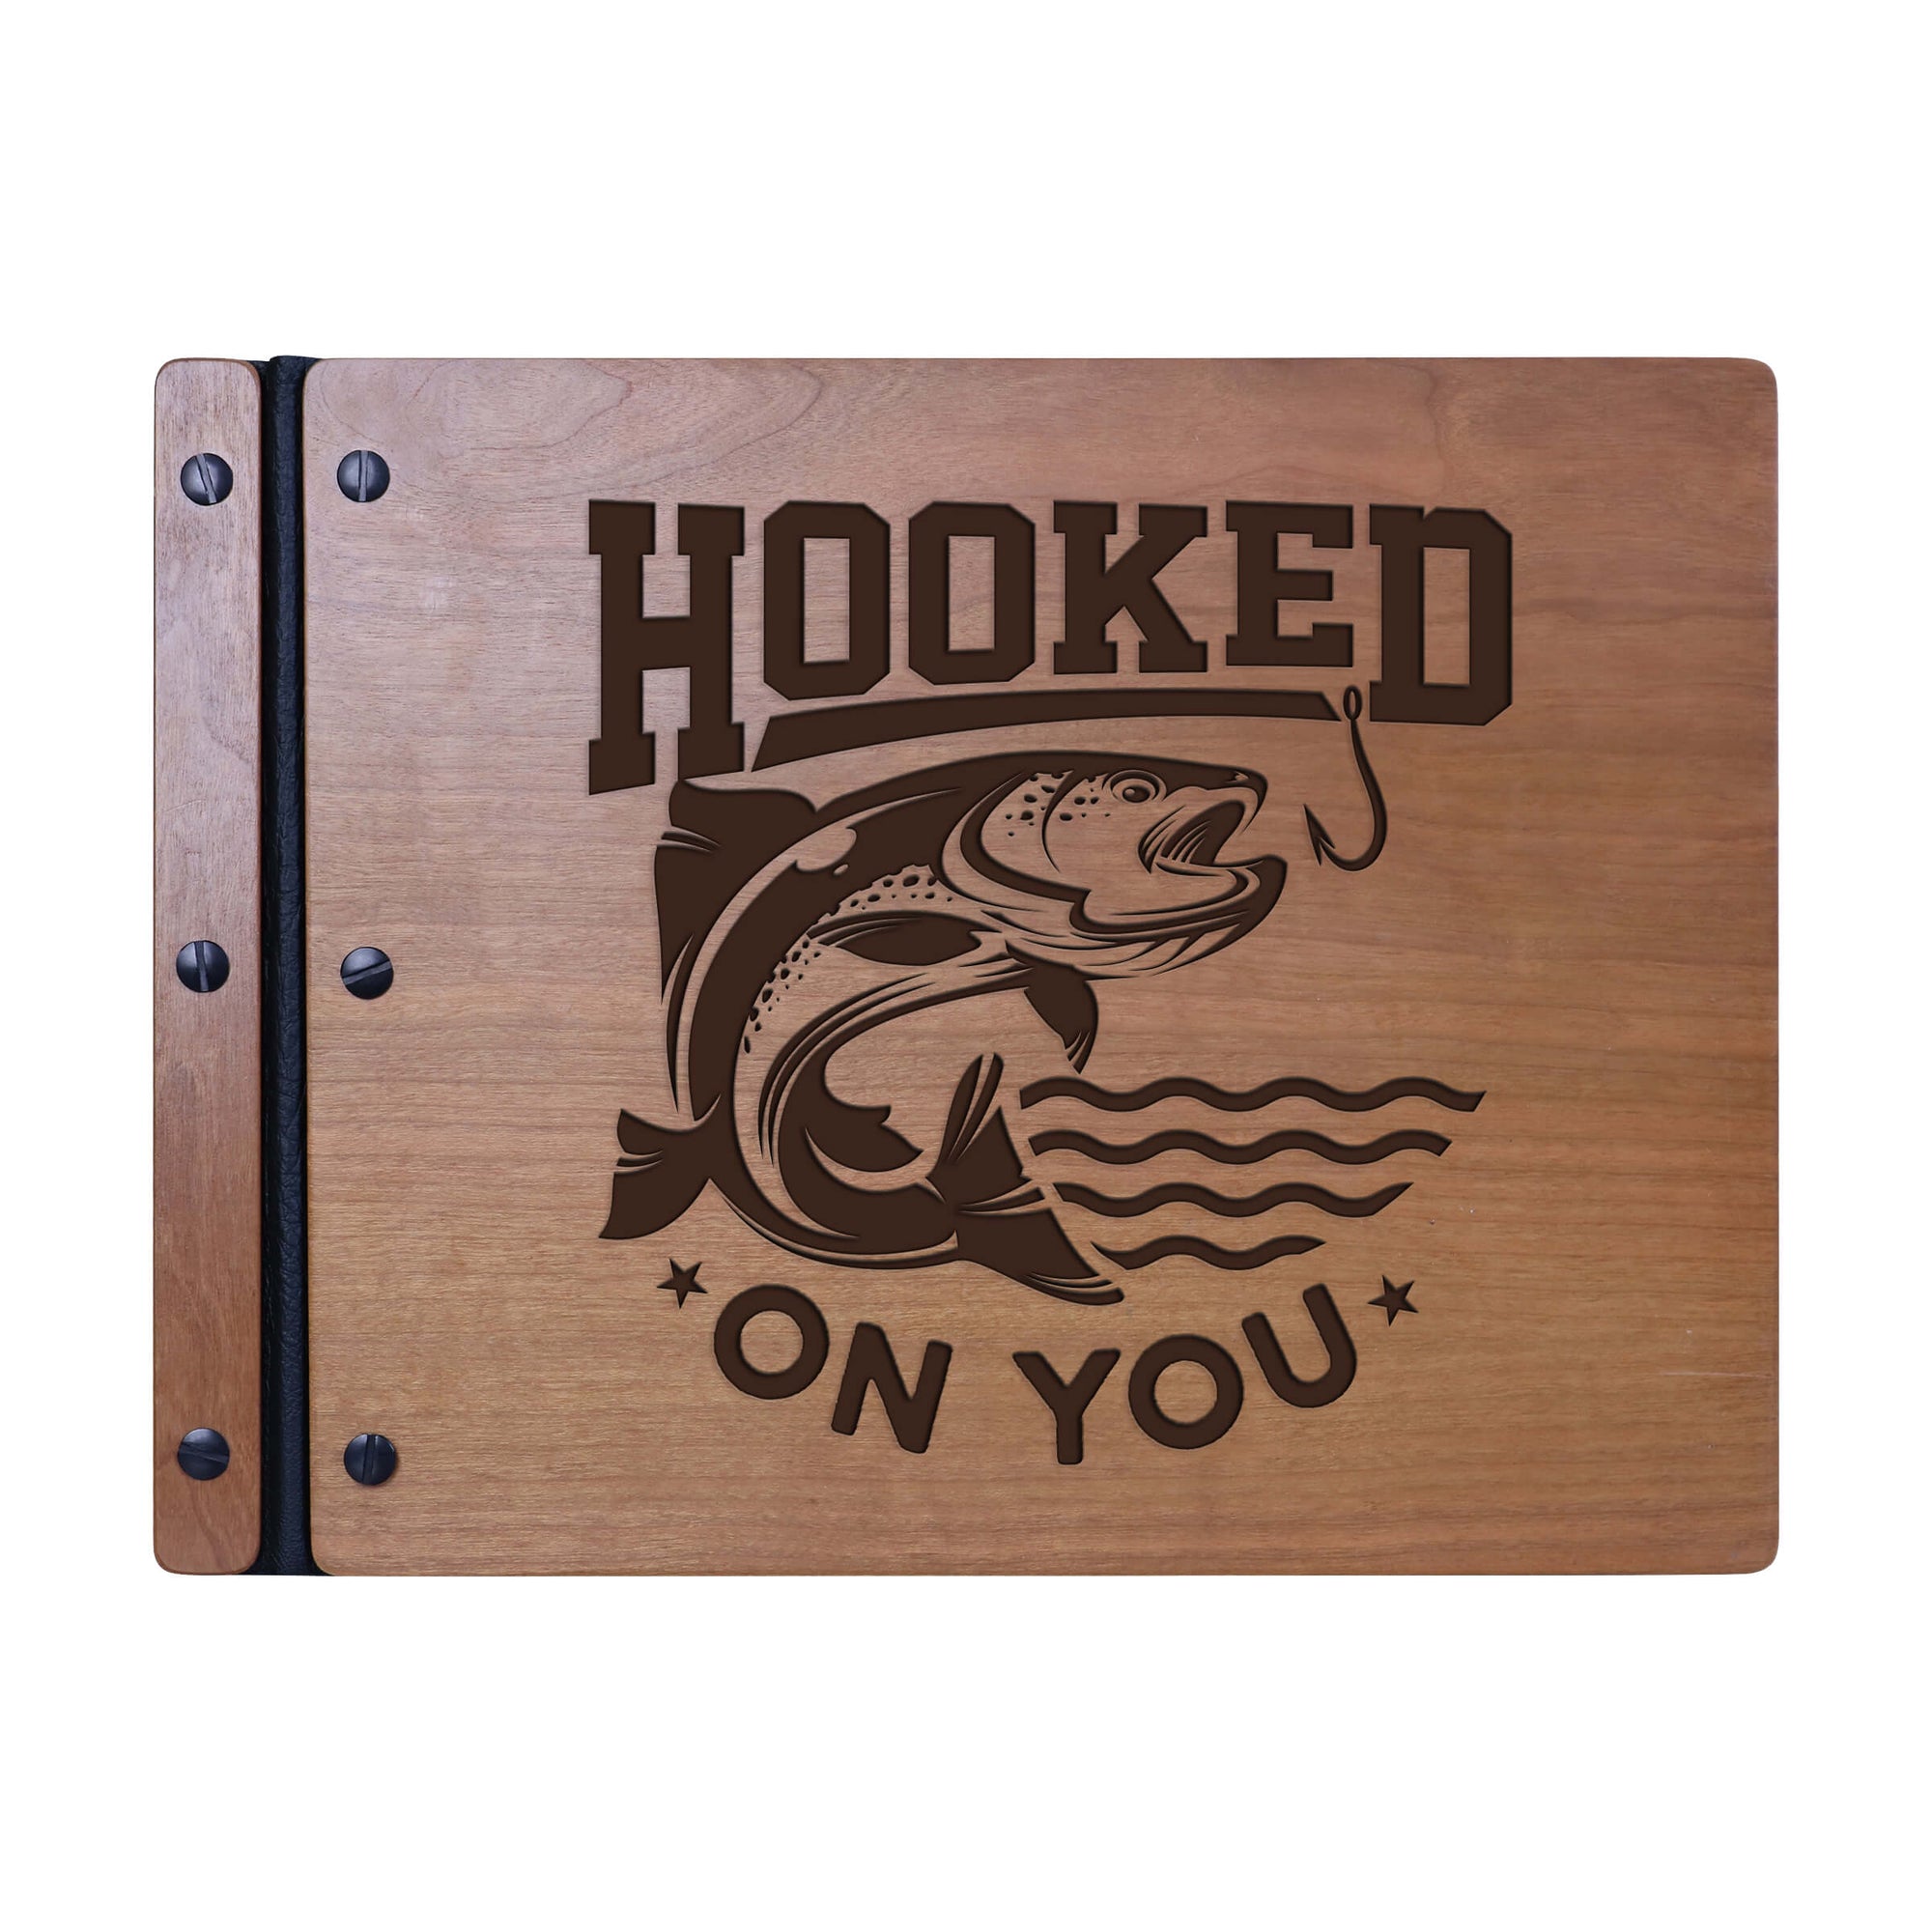 Wooden Memorial Large Guestbook with Fisherman Verse for Funeral Service - Hooked On You